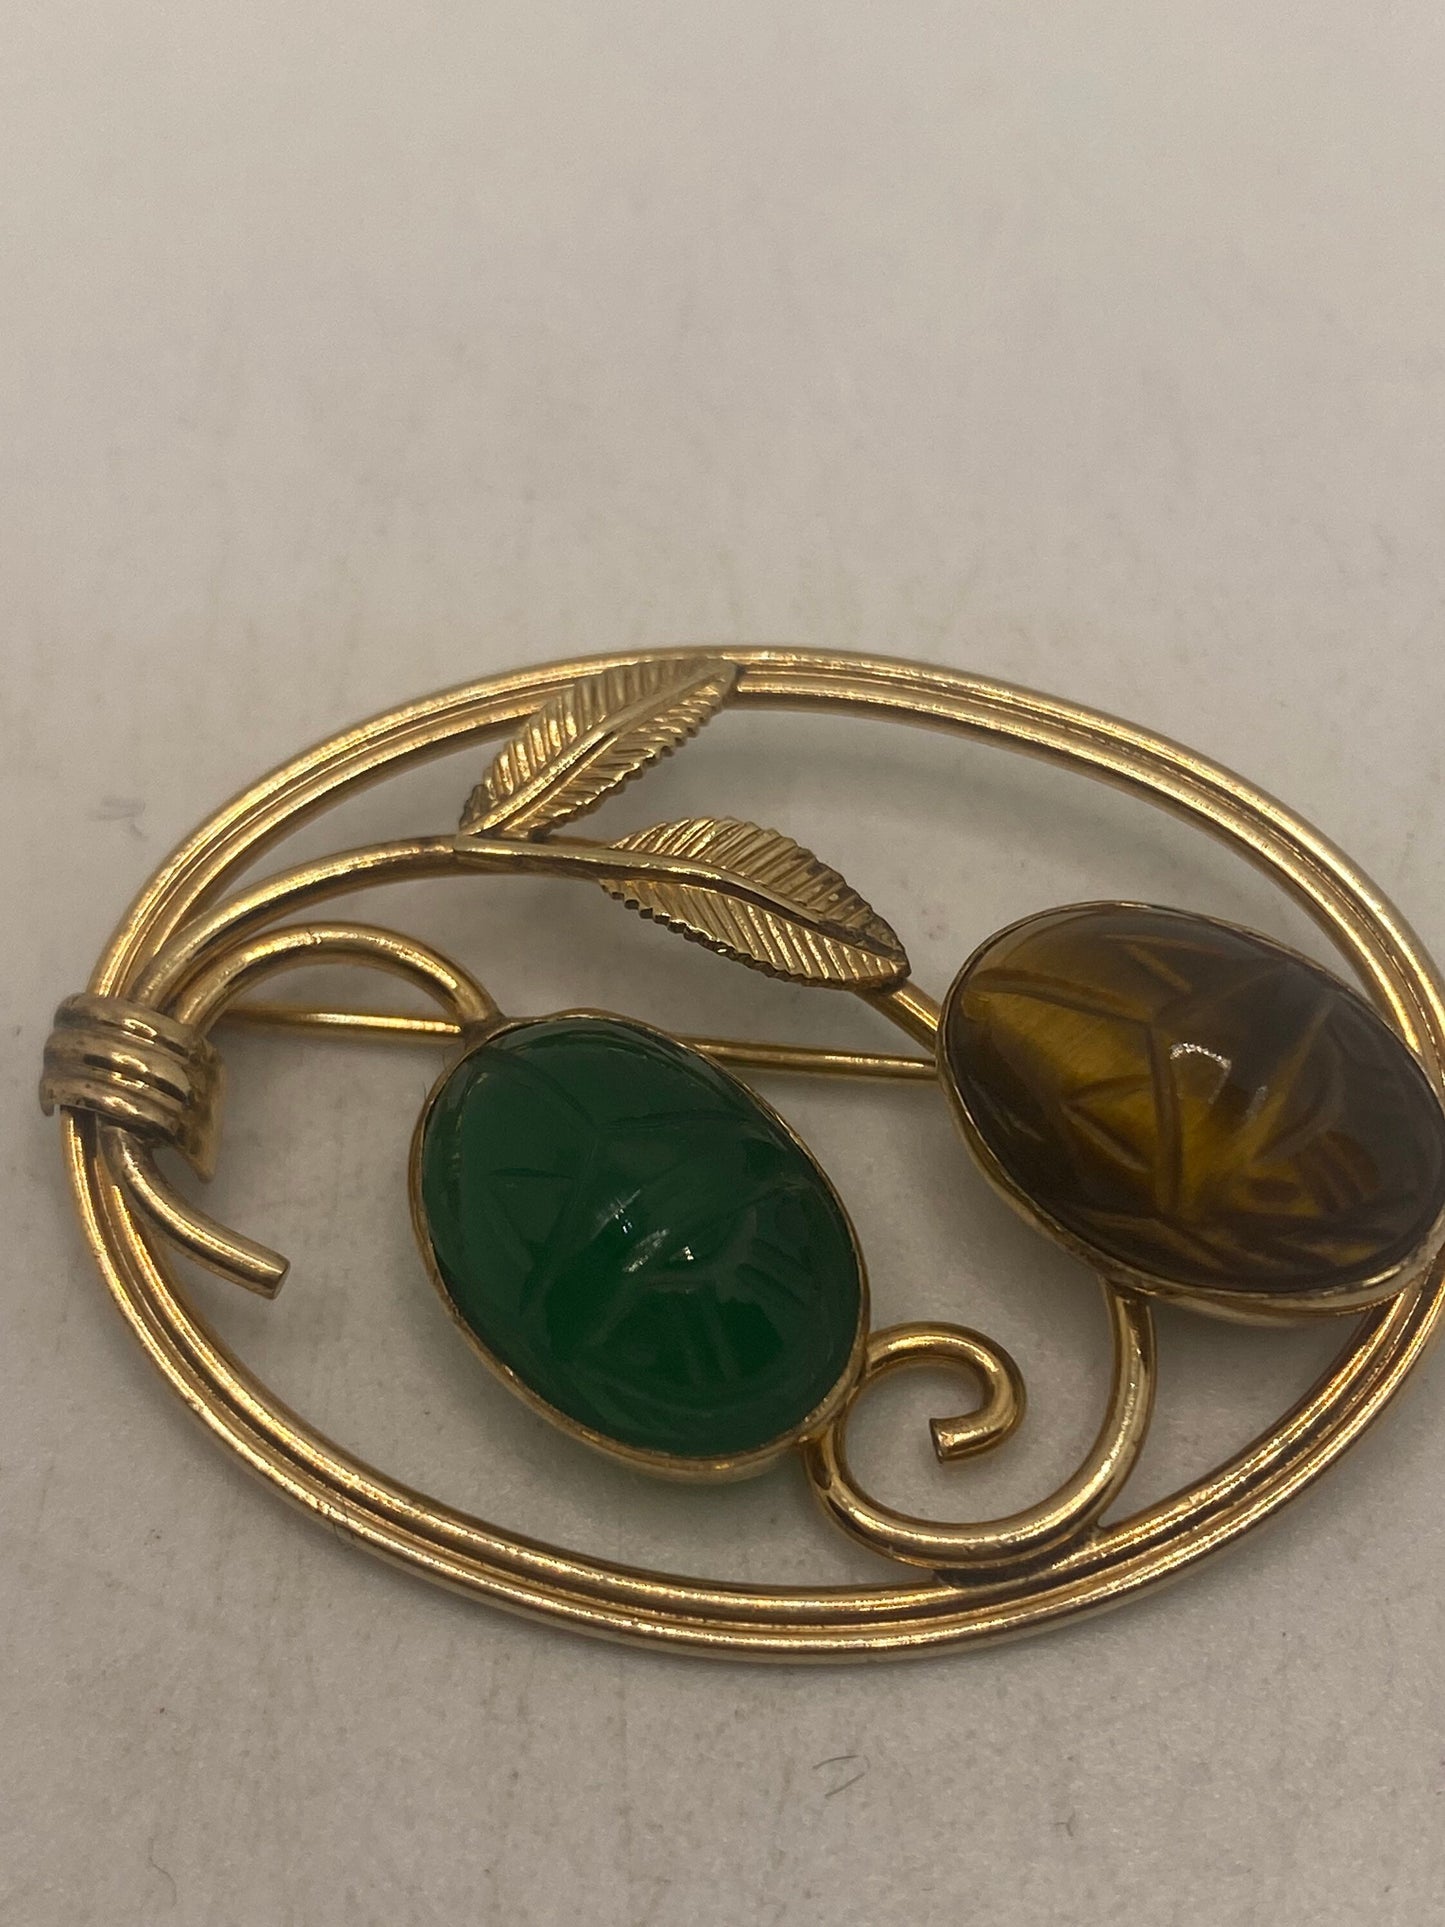 Vintage Scarab Carved Yellow Gold Filled Brooch Pin